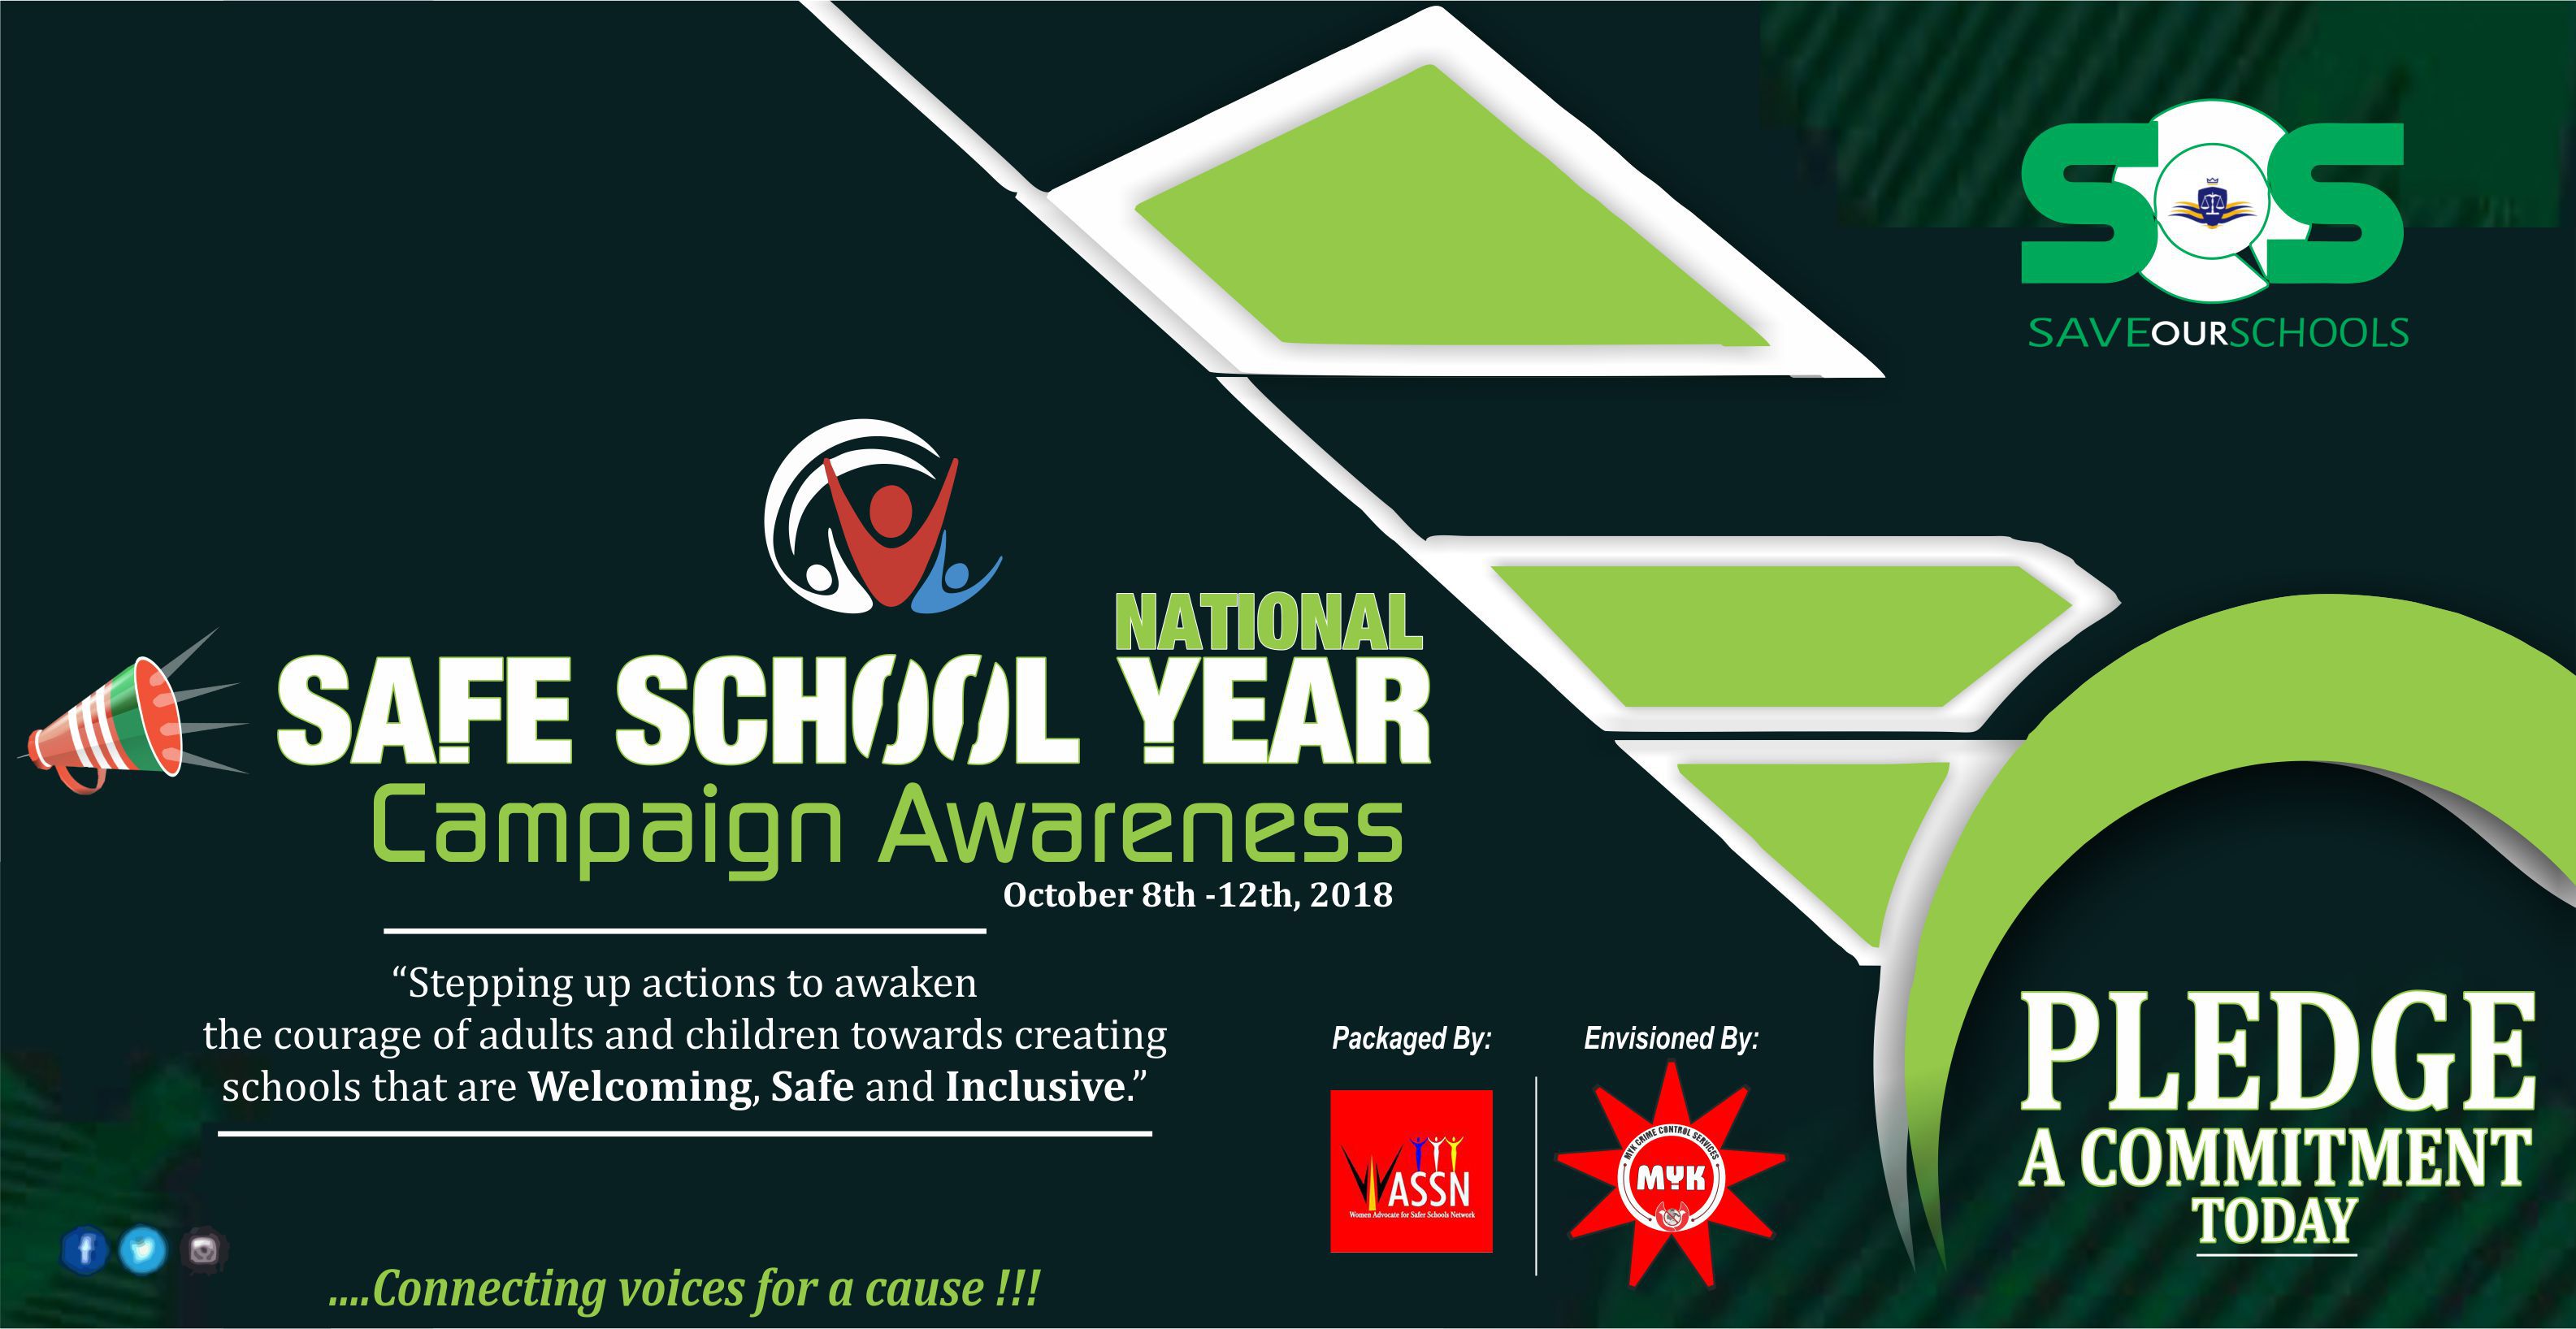 Safe School Year Campaign Awareness